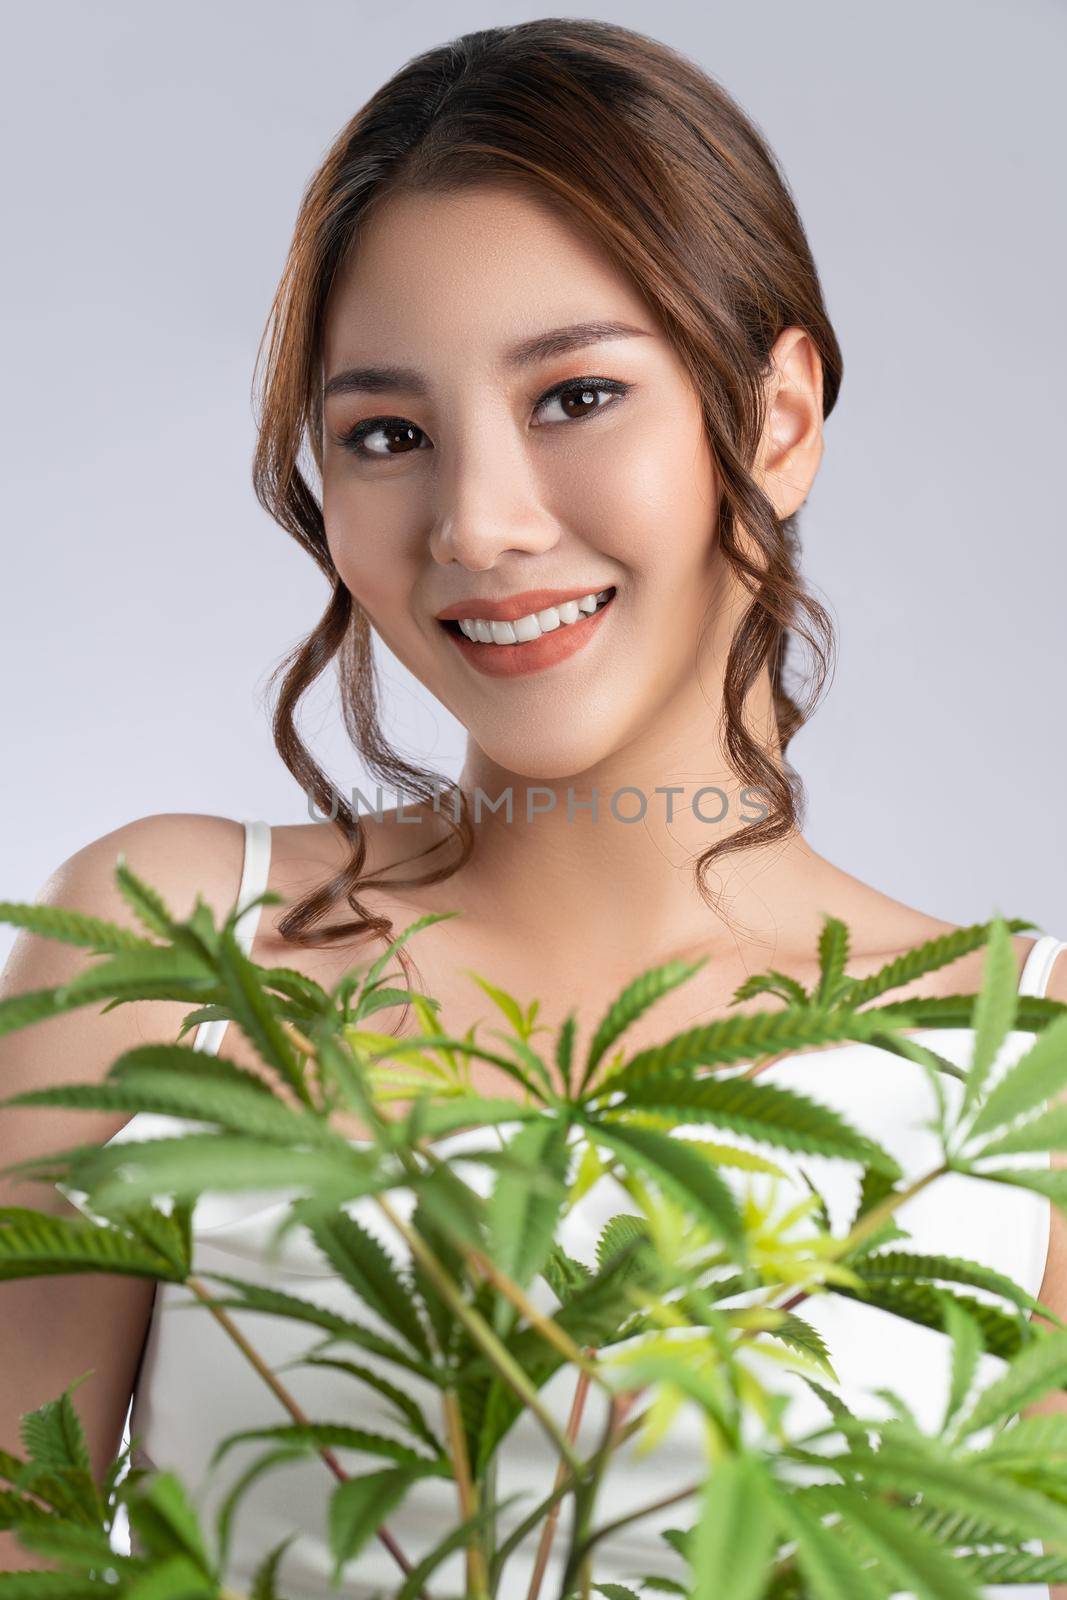 Close up gorgeous girl with healthy fresh skin and makeup holding hemp pot. by biancoblue